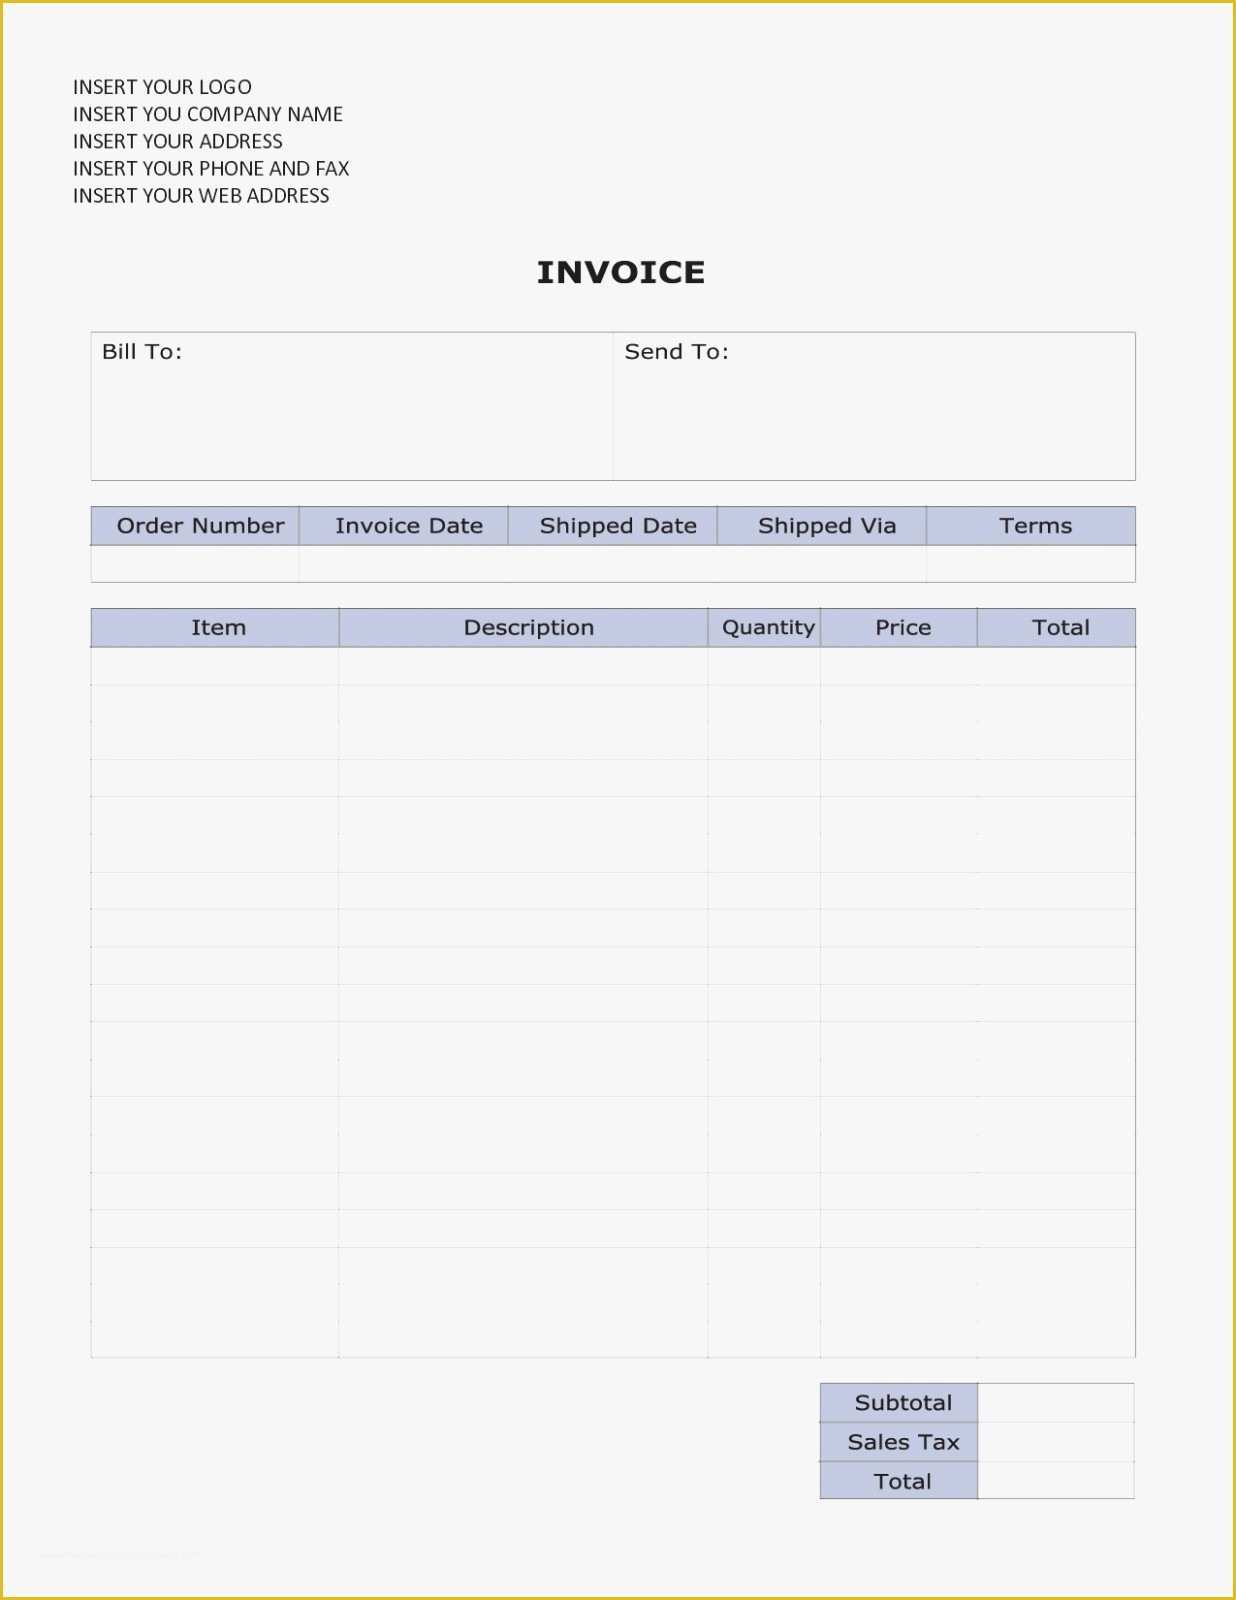 Invoice Template Mac Free Download Of Invoice Template Mac Free Download Filename Port by